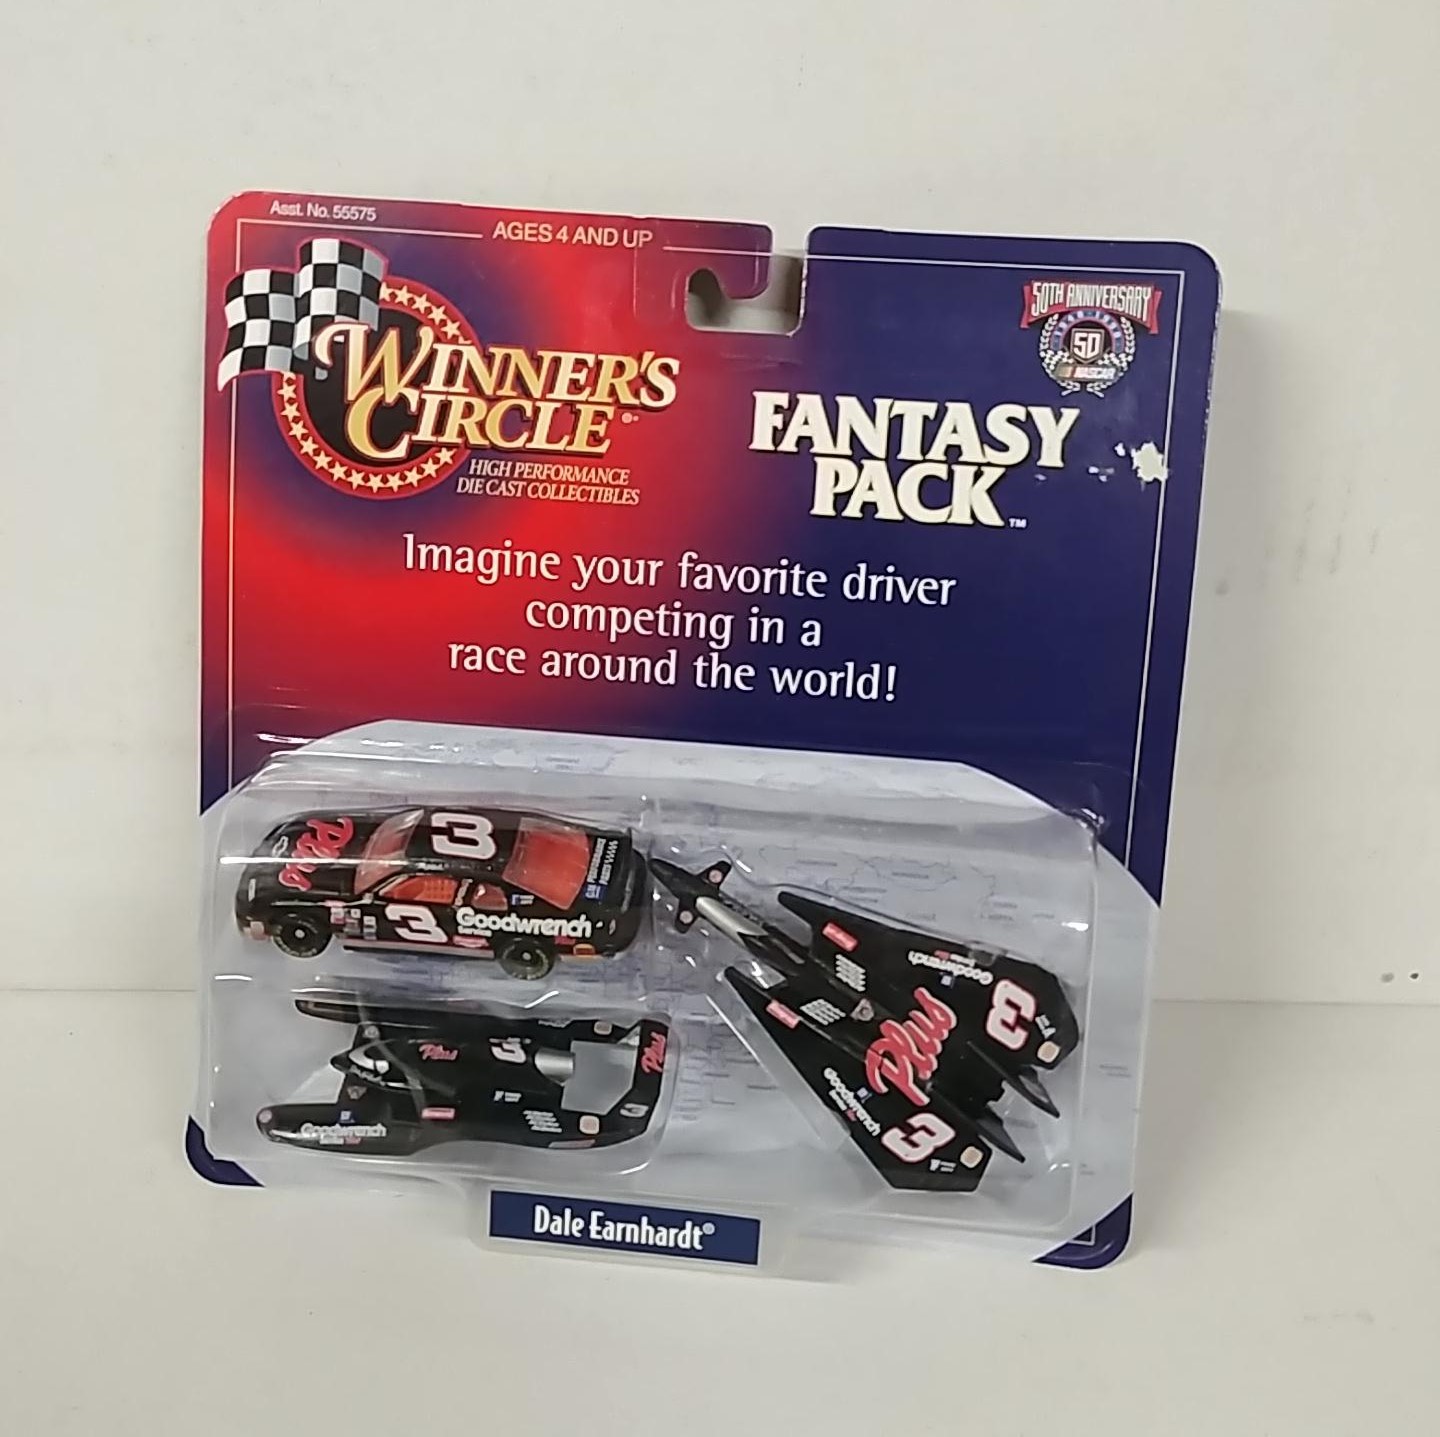 1999 Dale Earnhardt 1/64th GM Goodwrench "Fantasy" 3 pack car